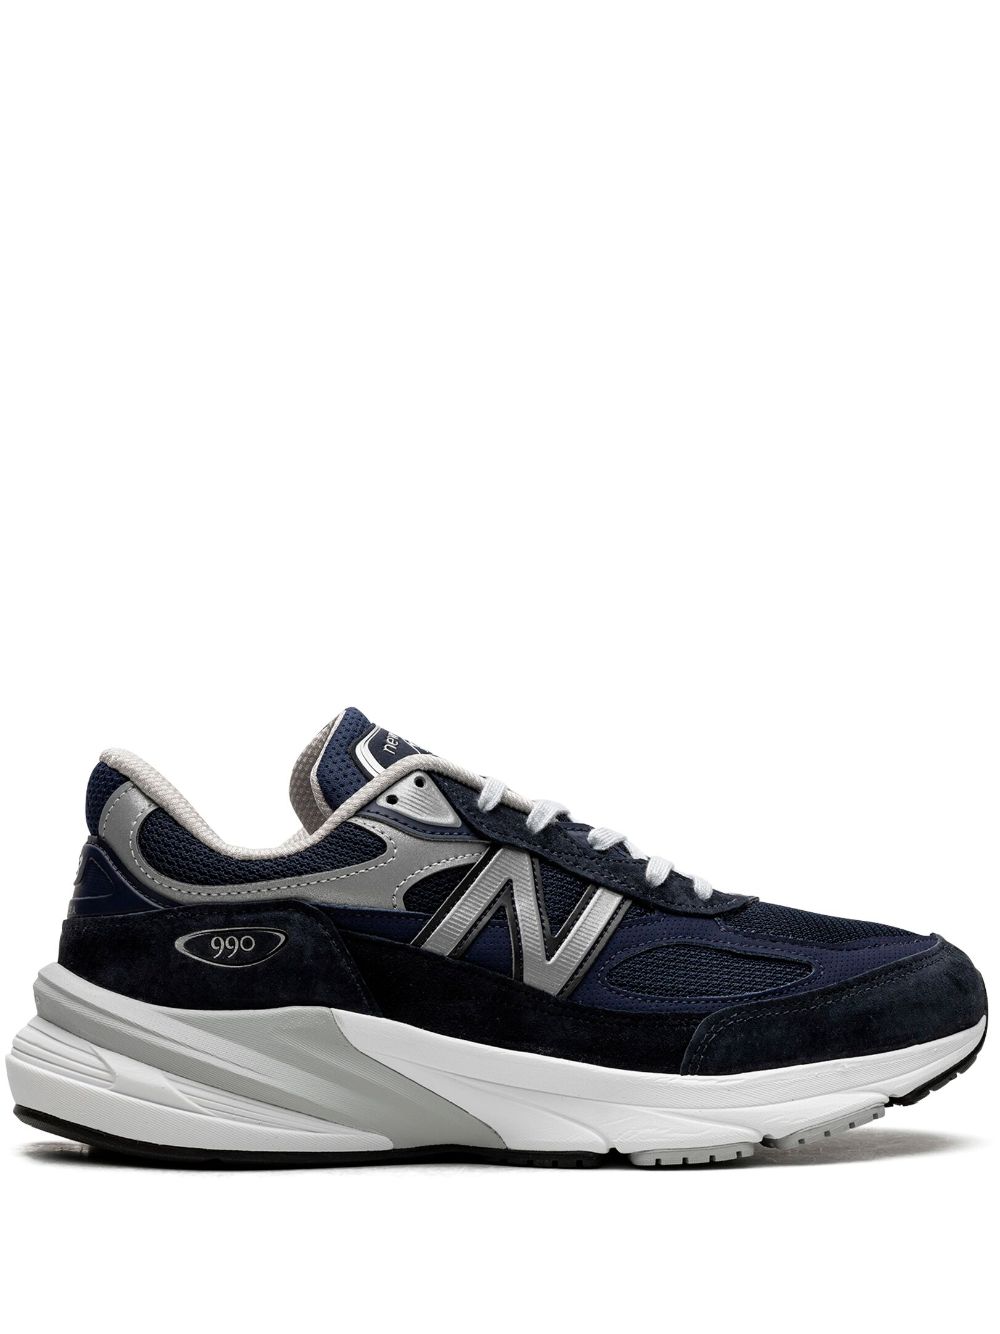 New Balance 990v6 "Navy" leather sneakers - Blue